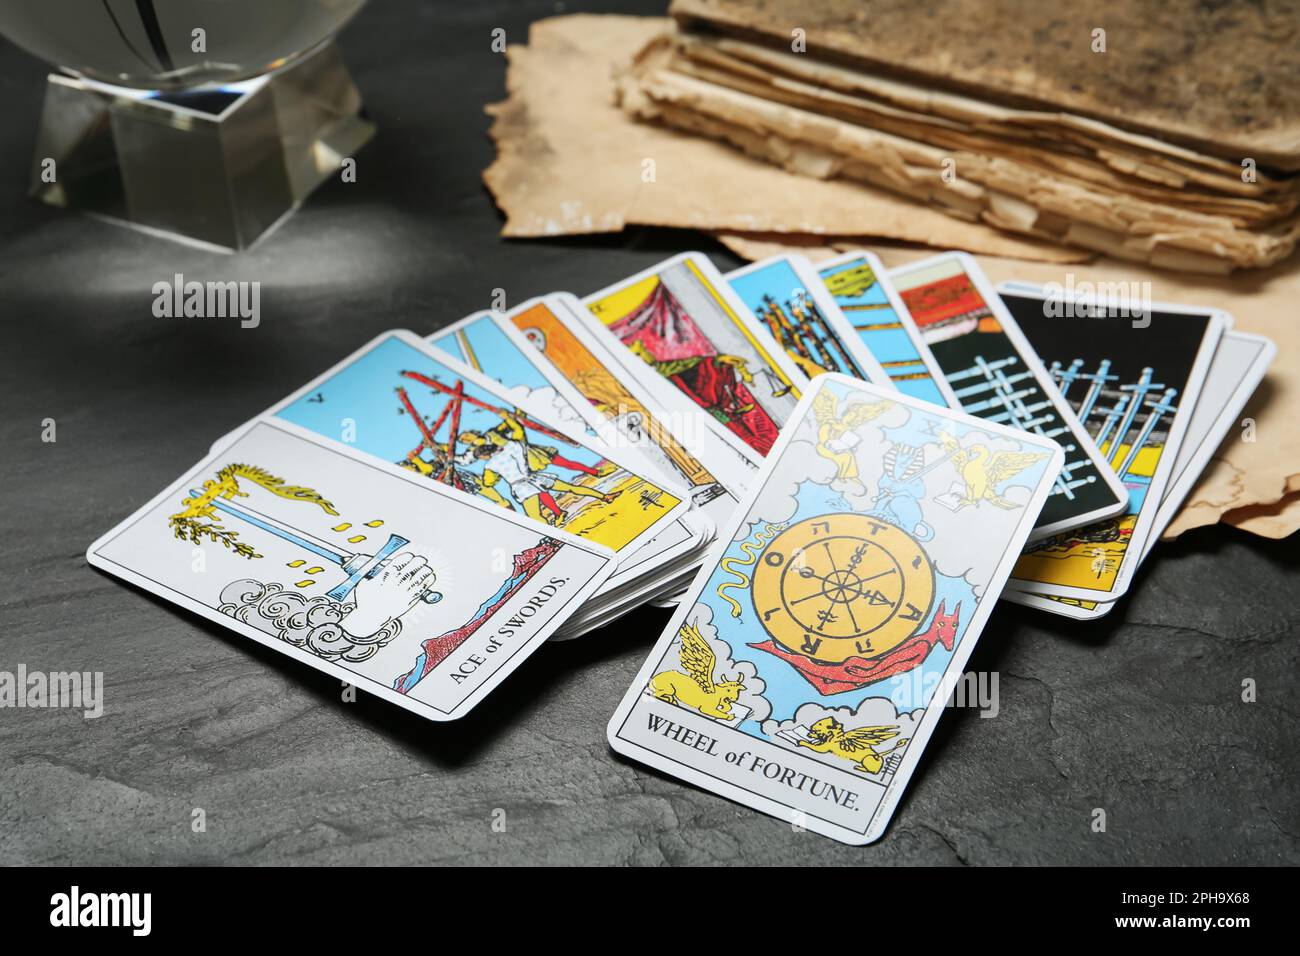 Wheel of Fortune and other tarot cards on black table Stock Photo